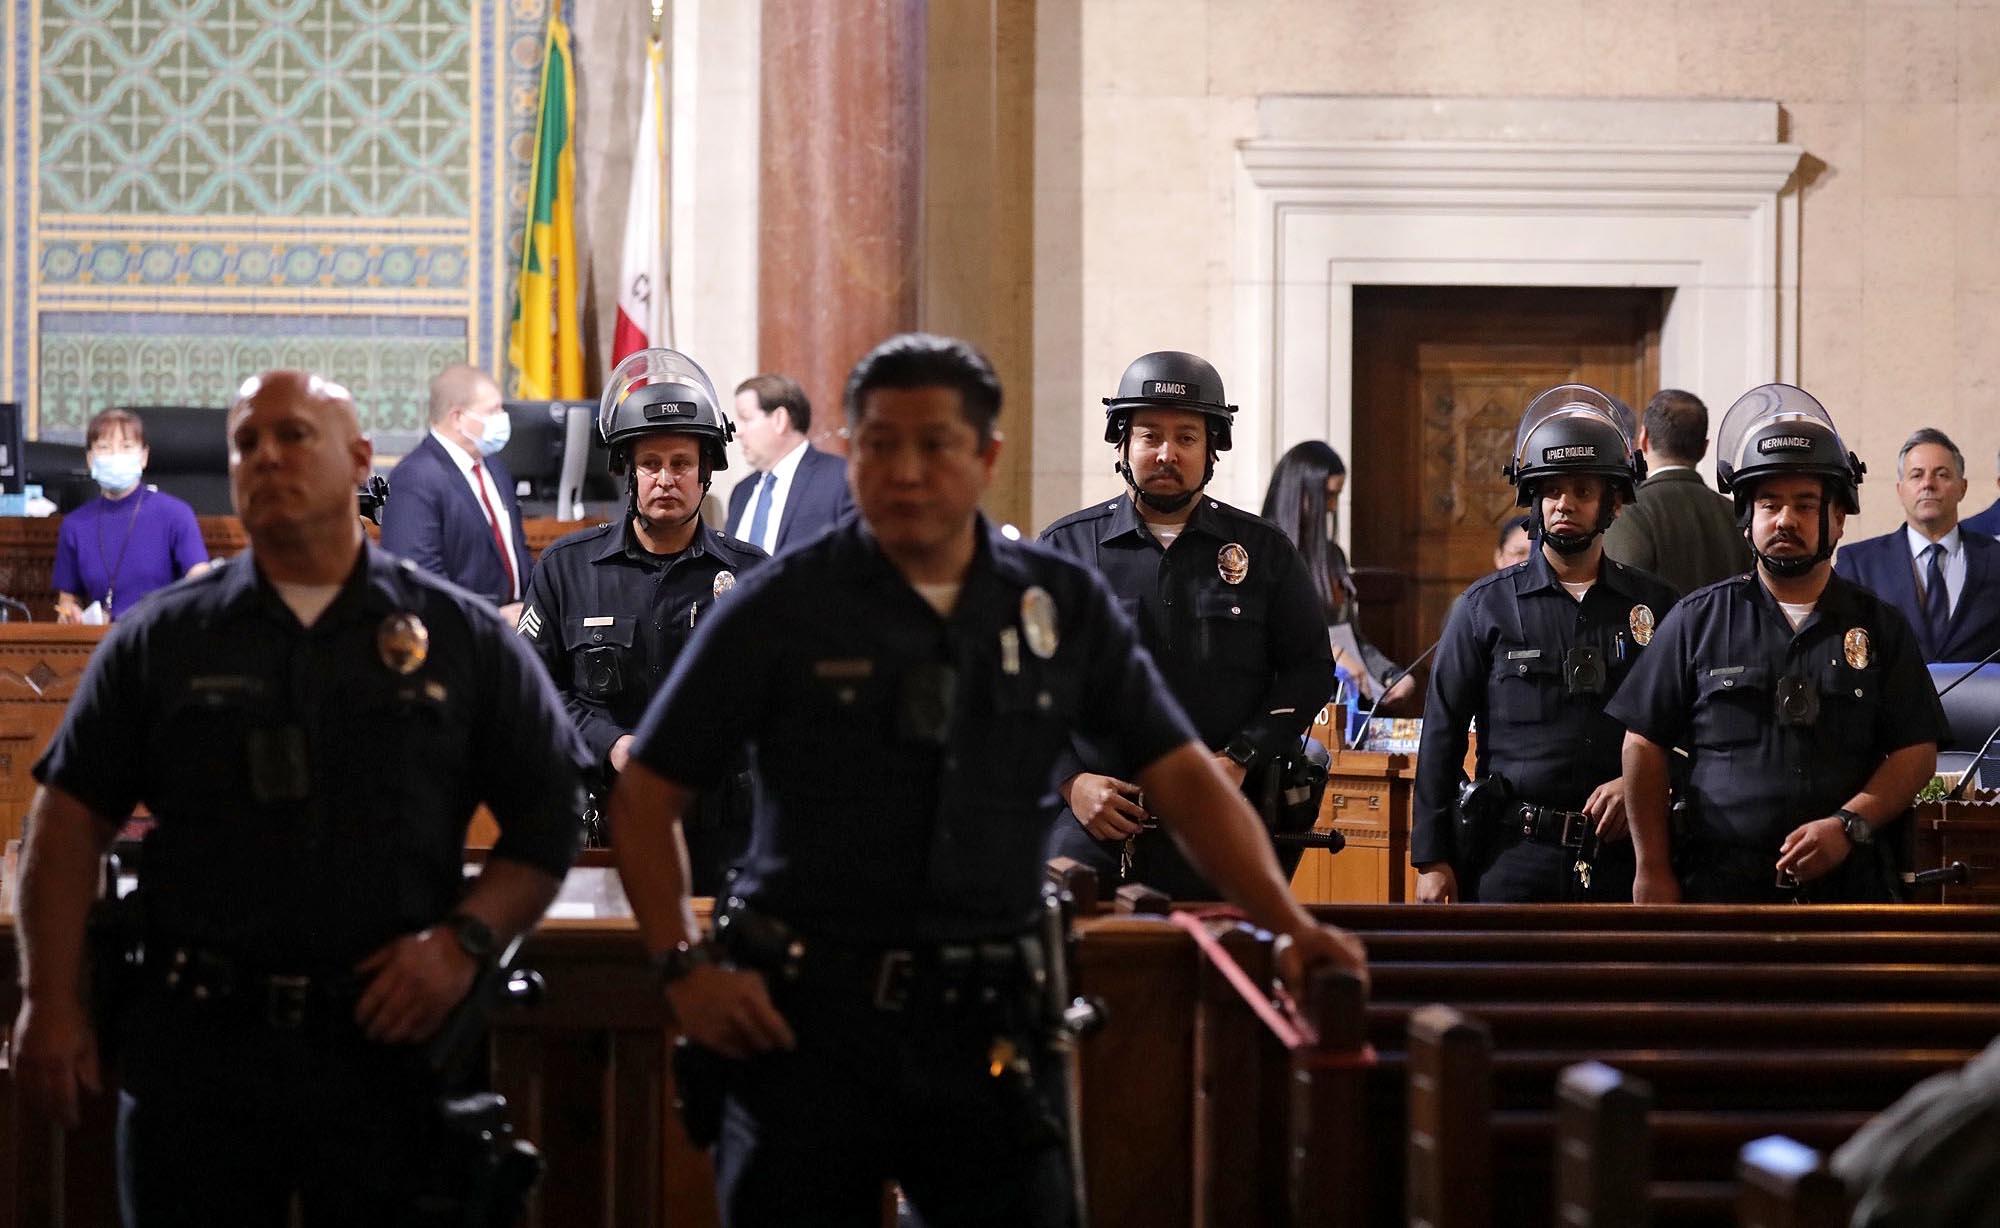 LAPD officers stand guard after the Los Angeles City Council chambers went into recess.